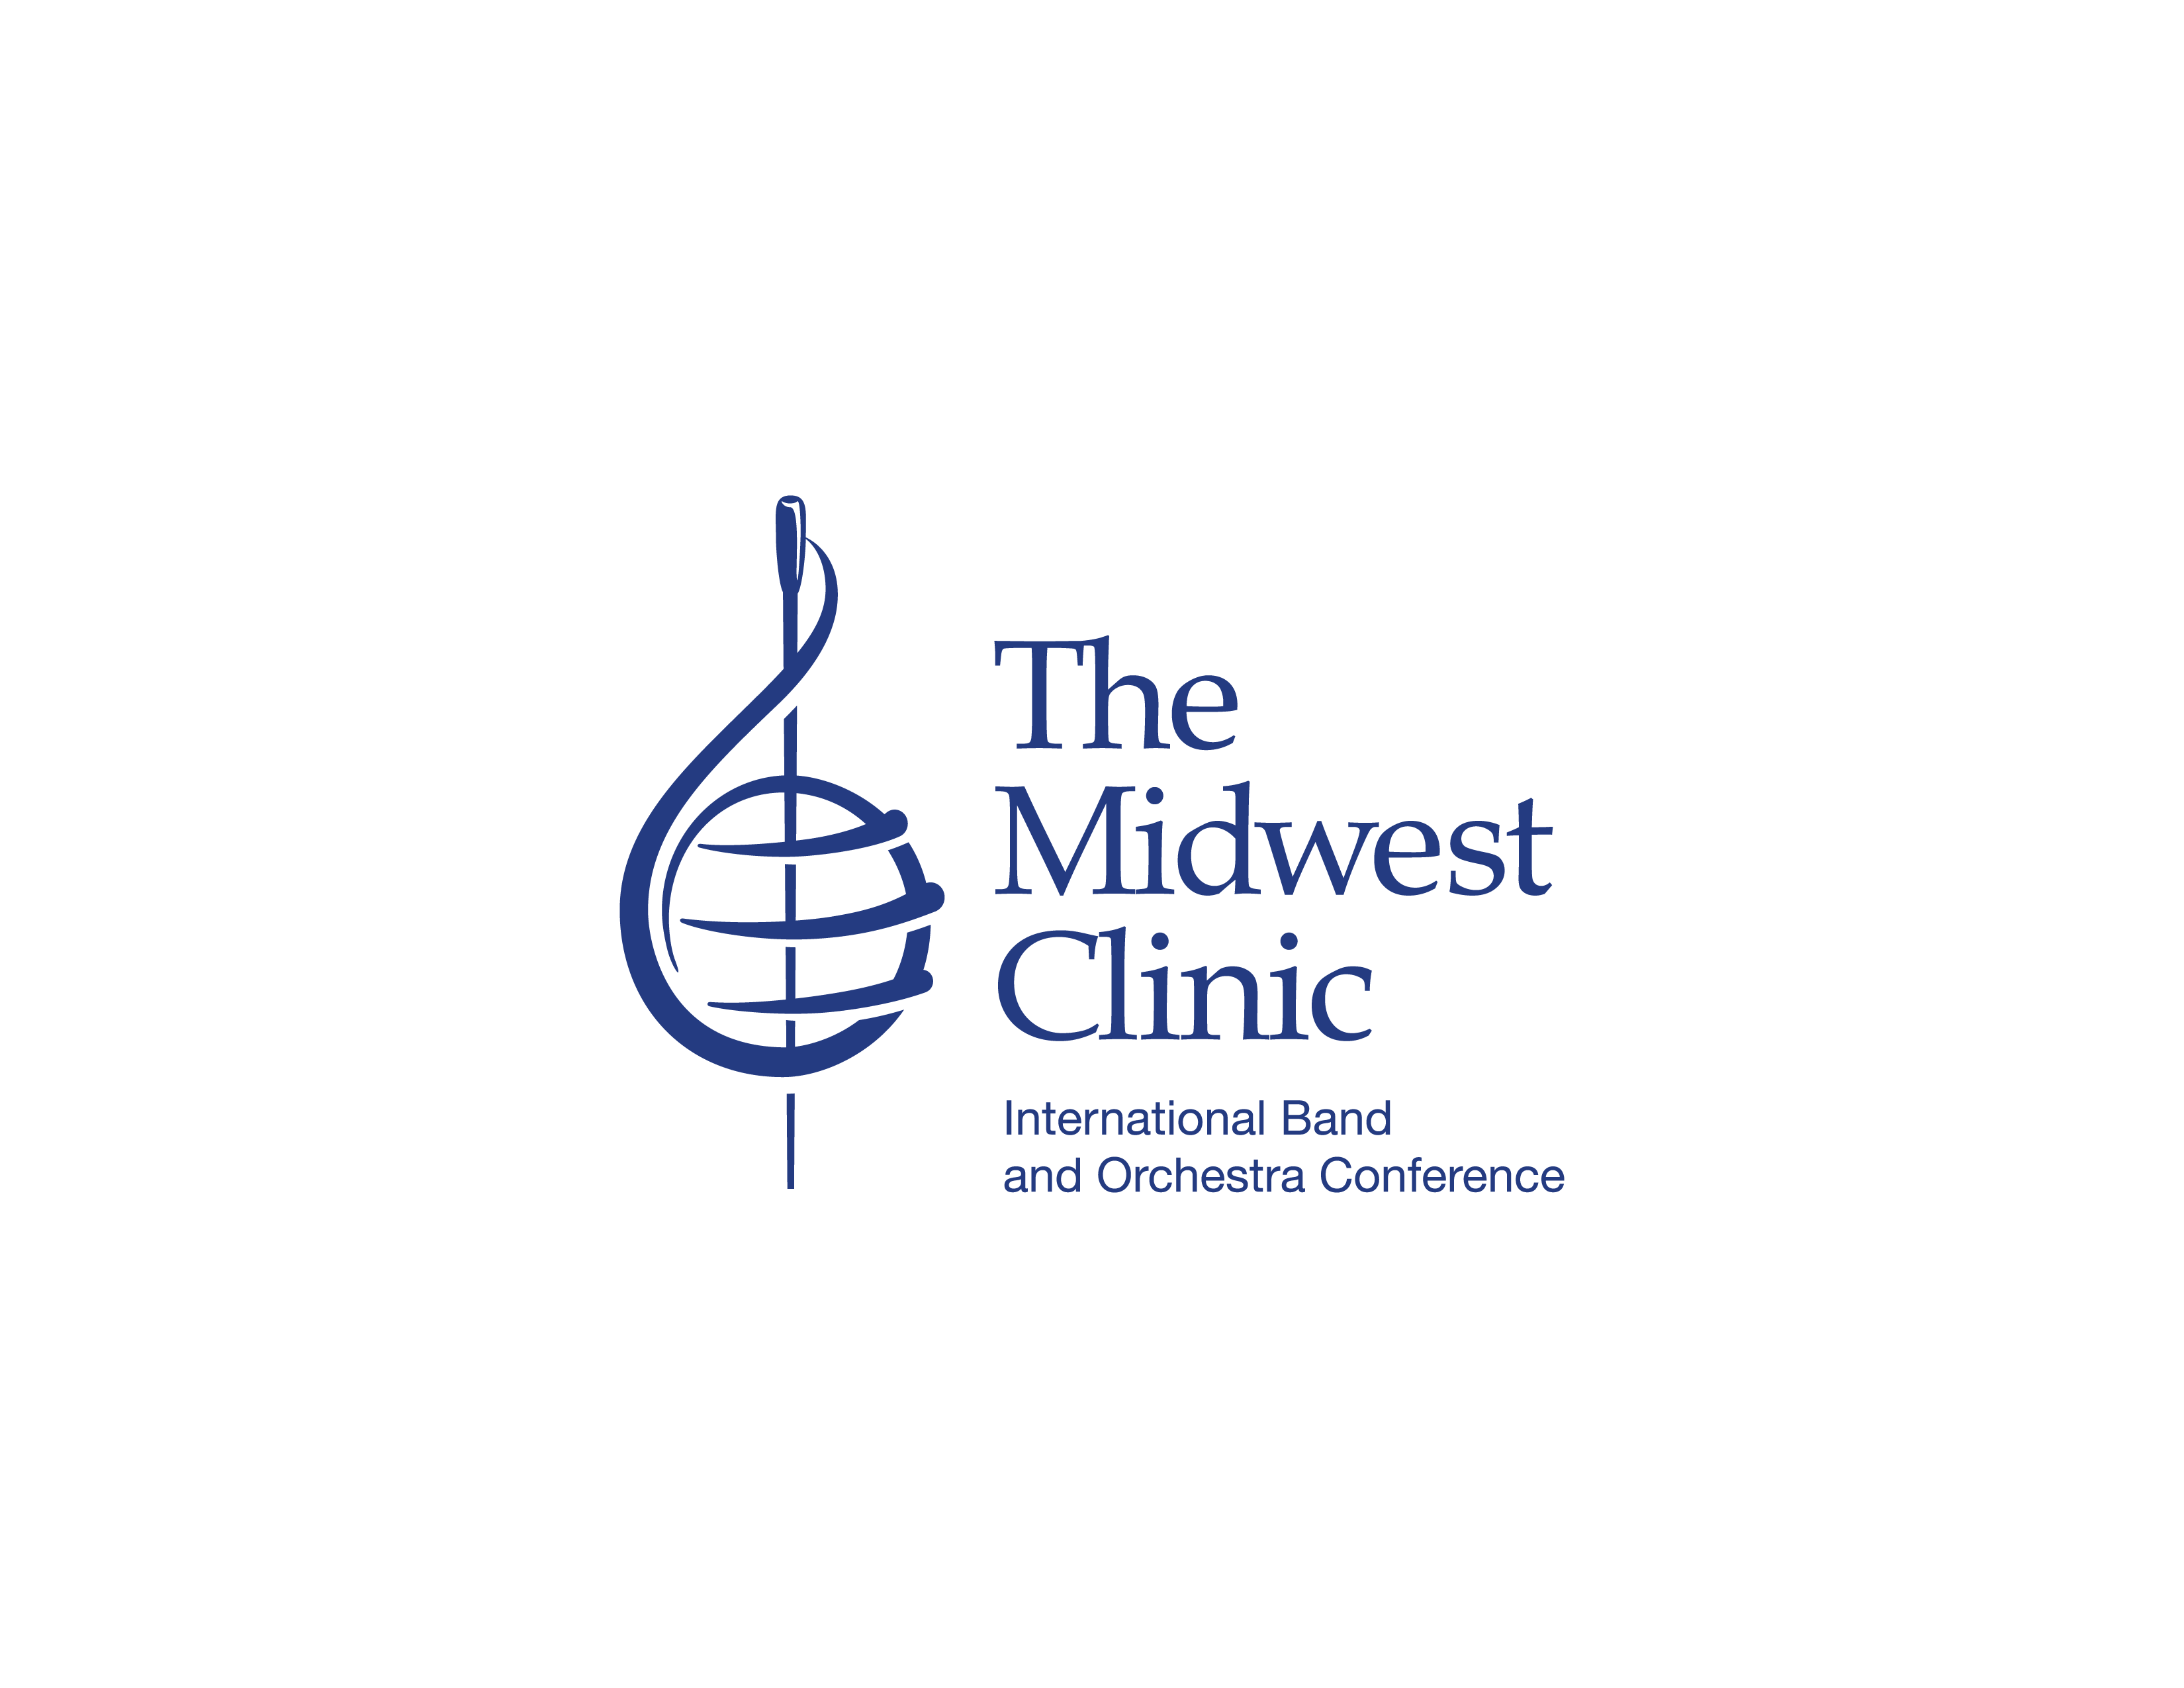 Welcome to The Midwest Clinic 77th Annual Conference